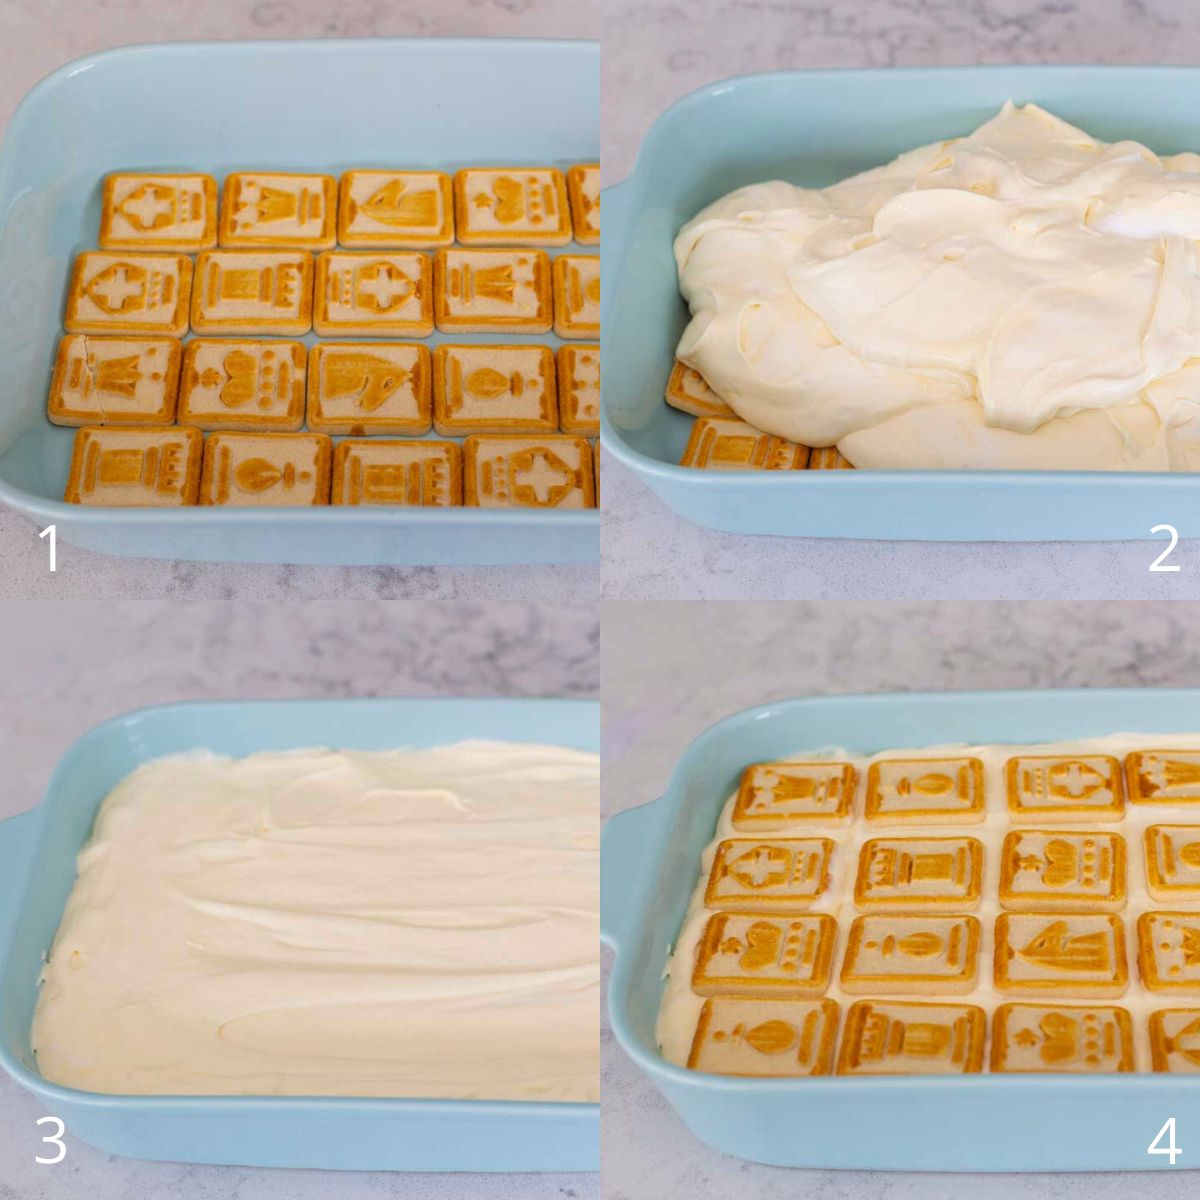 The photo collage shows how to assemble the no bake pudding torte.